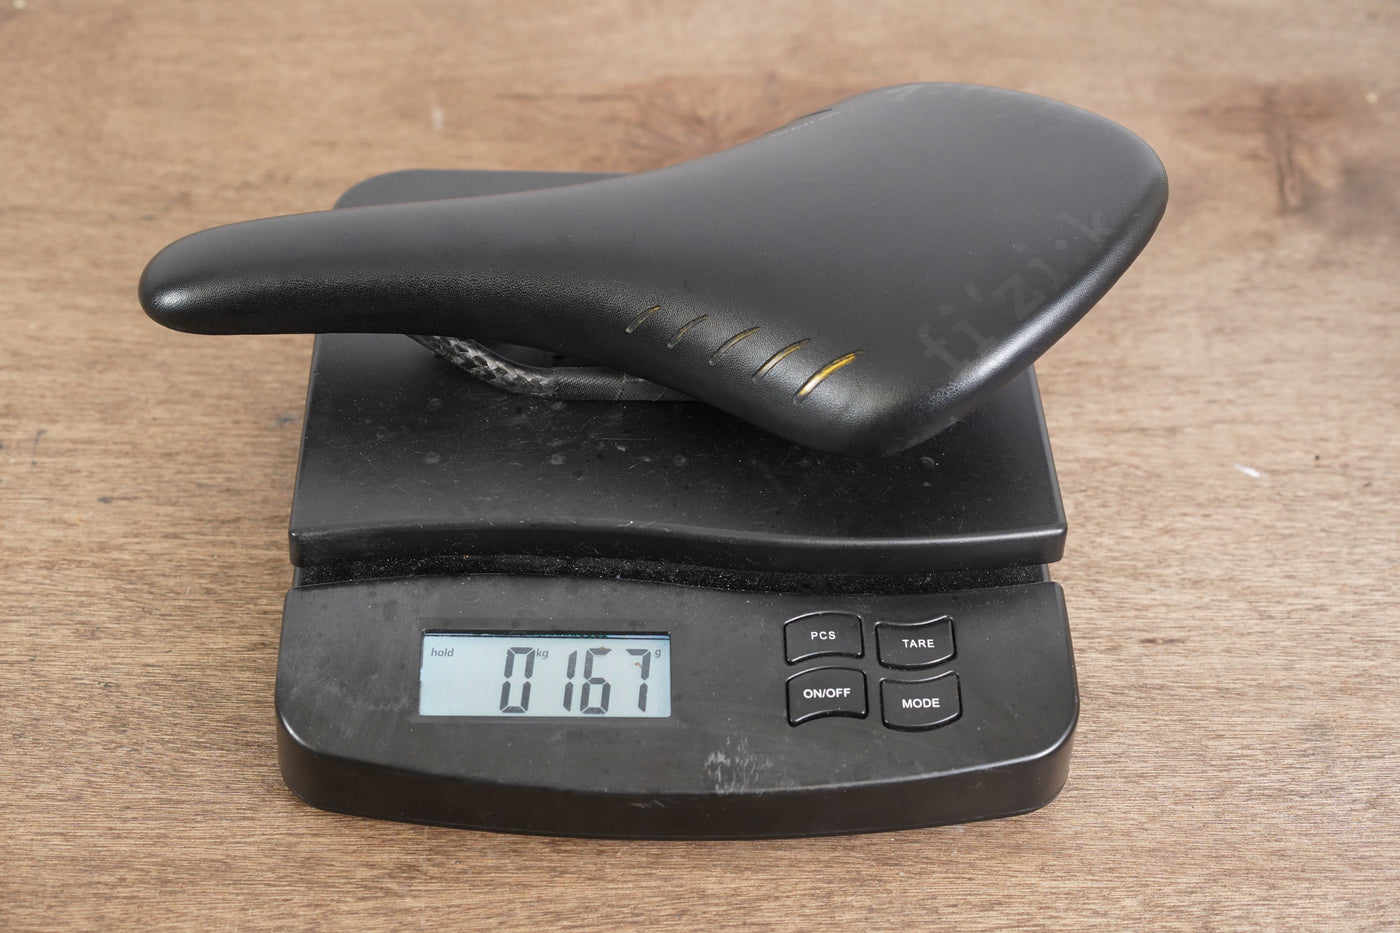 145mm Fizik Arione Donna 00 Carbon Braided Rail Road Saddle 167g